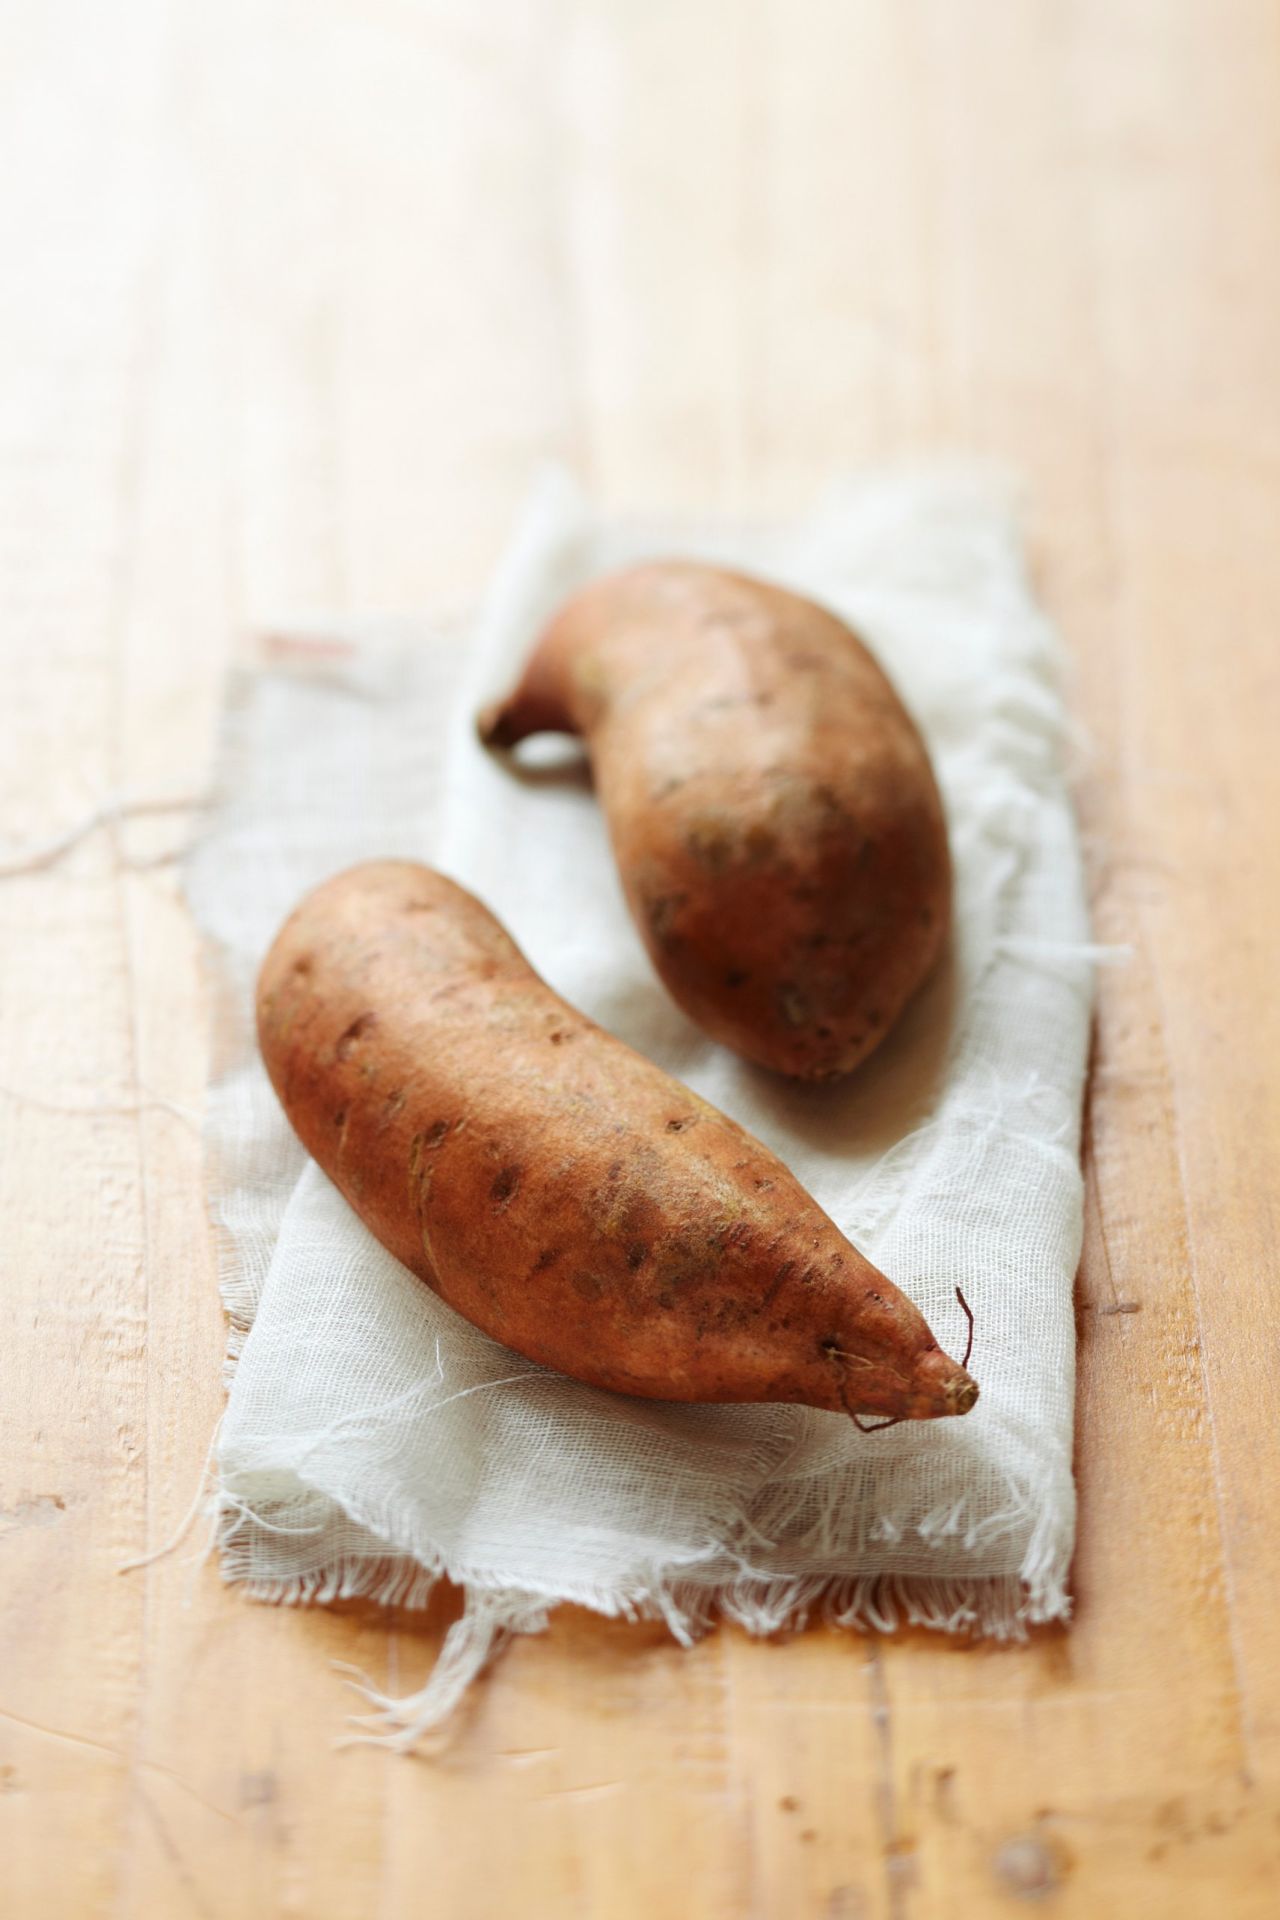 <strong>Sweet potatoes:</strong> These veggies are for much more than Thanksgiving casseroles. They're more nutritionally dense than their white-potato counterparts. Try roasting them; they'll taste delicious, and you may maintain more vitamins than boiling. <br /><br />Health benefits include<br />• Excellent source of vitamin A <br />• Good source of iron <br />• Anti-inflammatory benefits <br /><br />Harvest season: September to December<br /><br /><a href="http://www.health.com/health/gallery/0,,20307221,00.html" target="_blank" target="_blank">Health.com: Eat this and burn more fat</a><br />